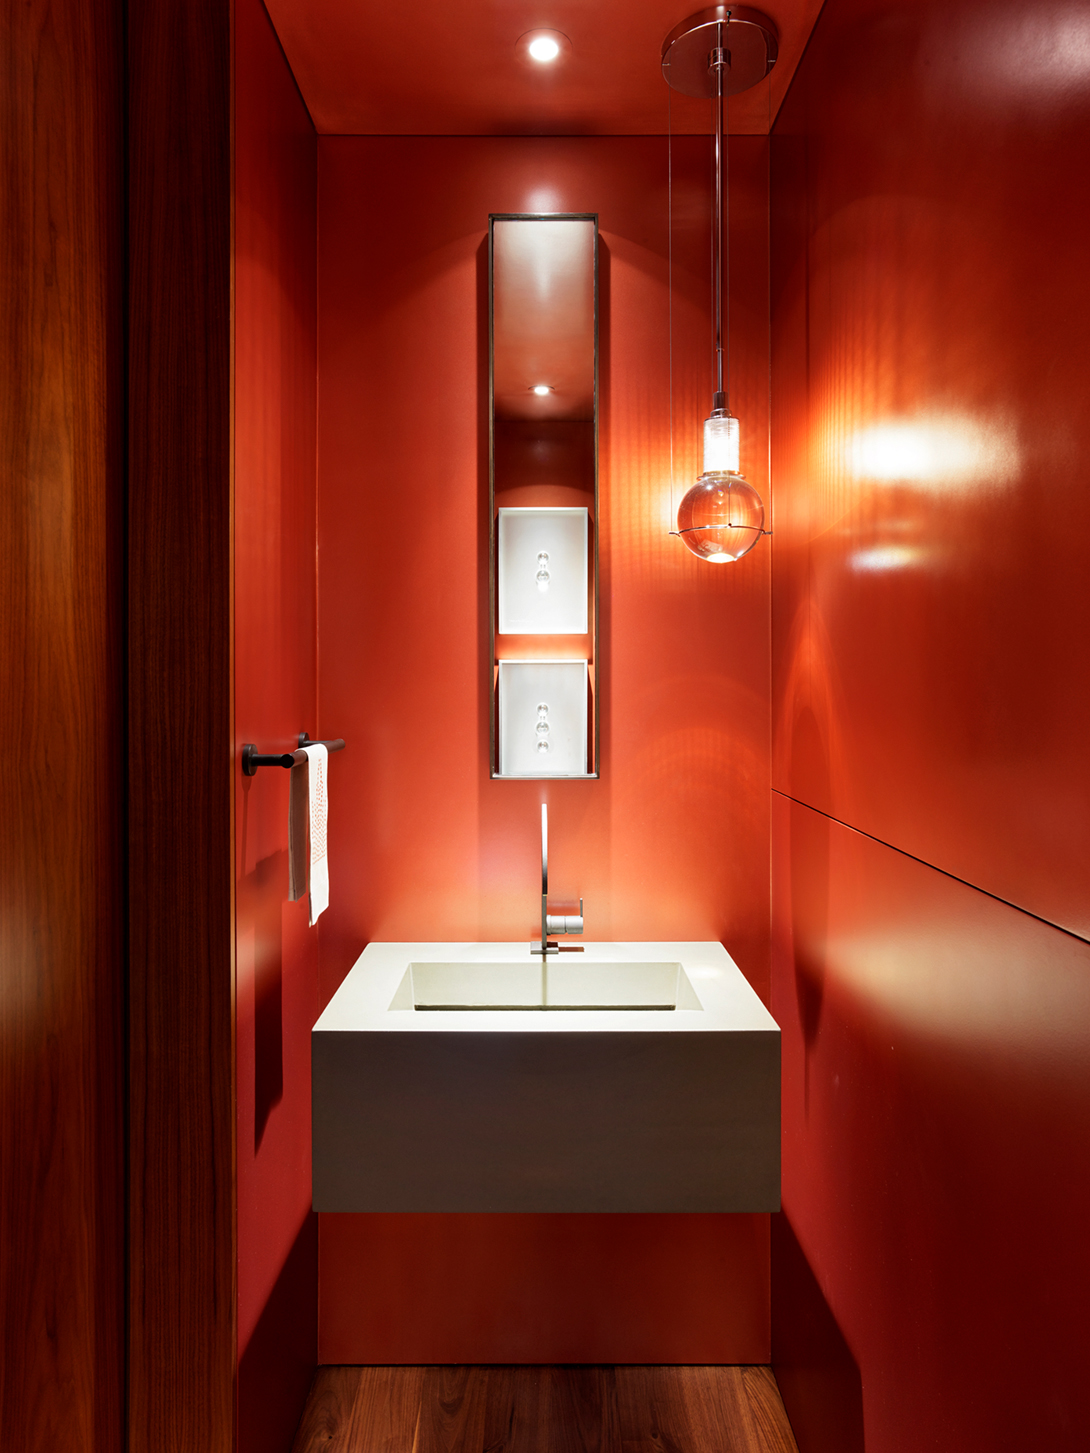 powder room walls are covered in an automotive paint in a deep-orange hue